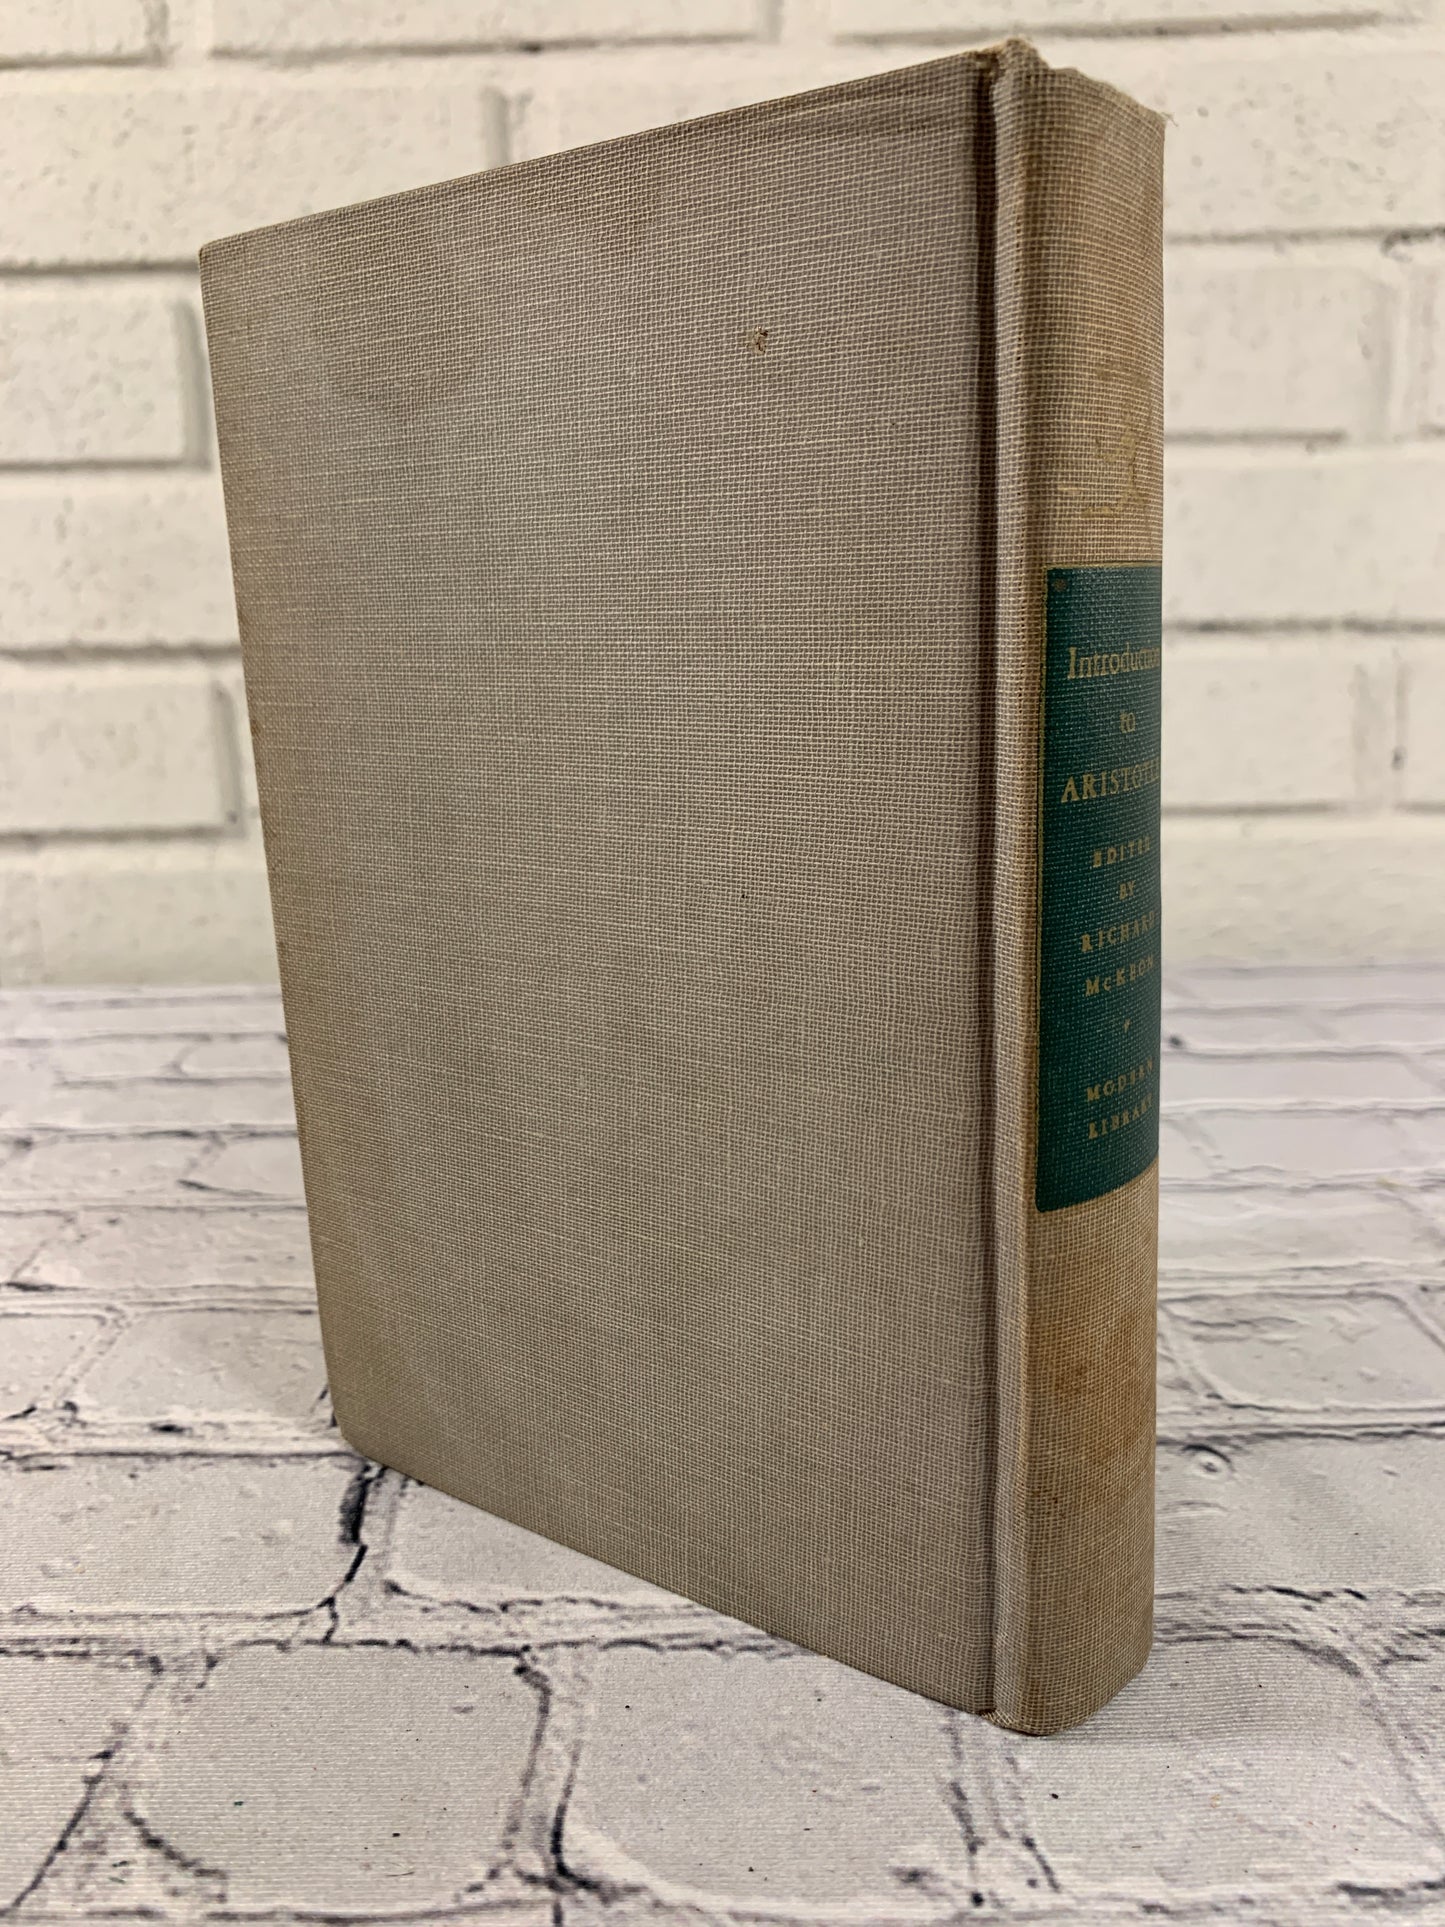 Introduction to Aristotle by Richard McKeon [1947 · Modern Library]